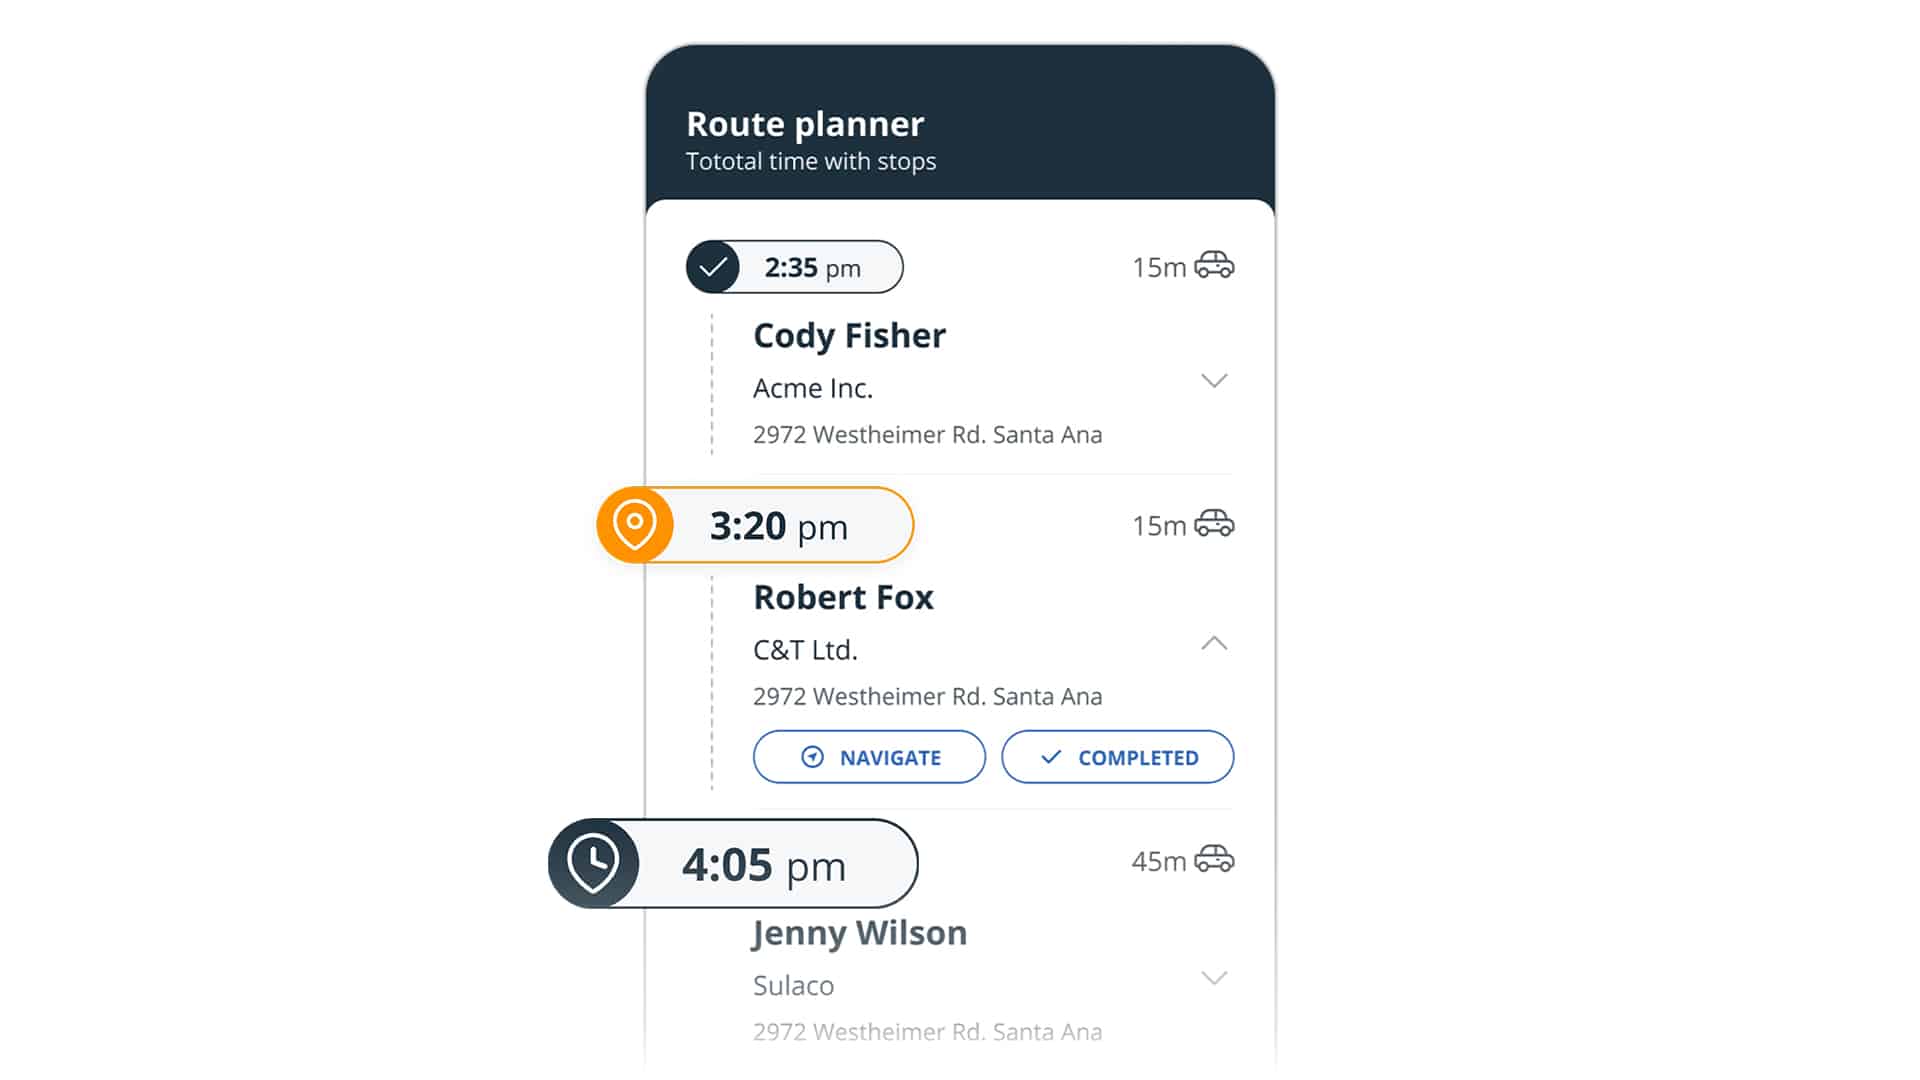 The On the Road app is an AI-powered route planning system that gives you the time estimate for your journey